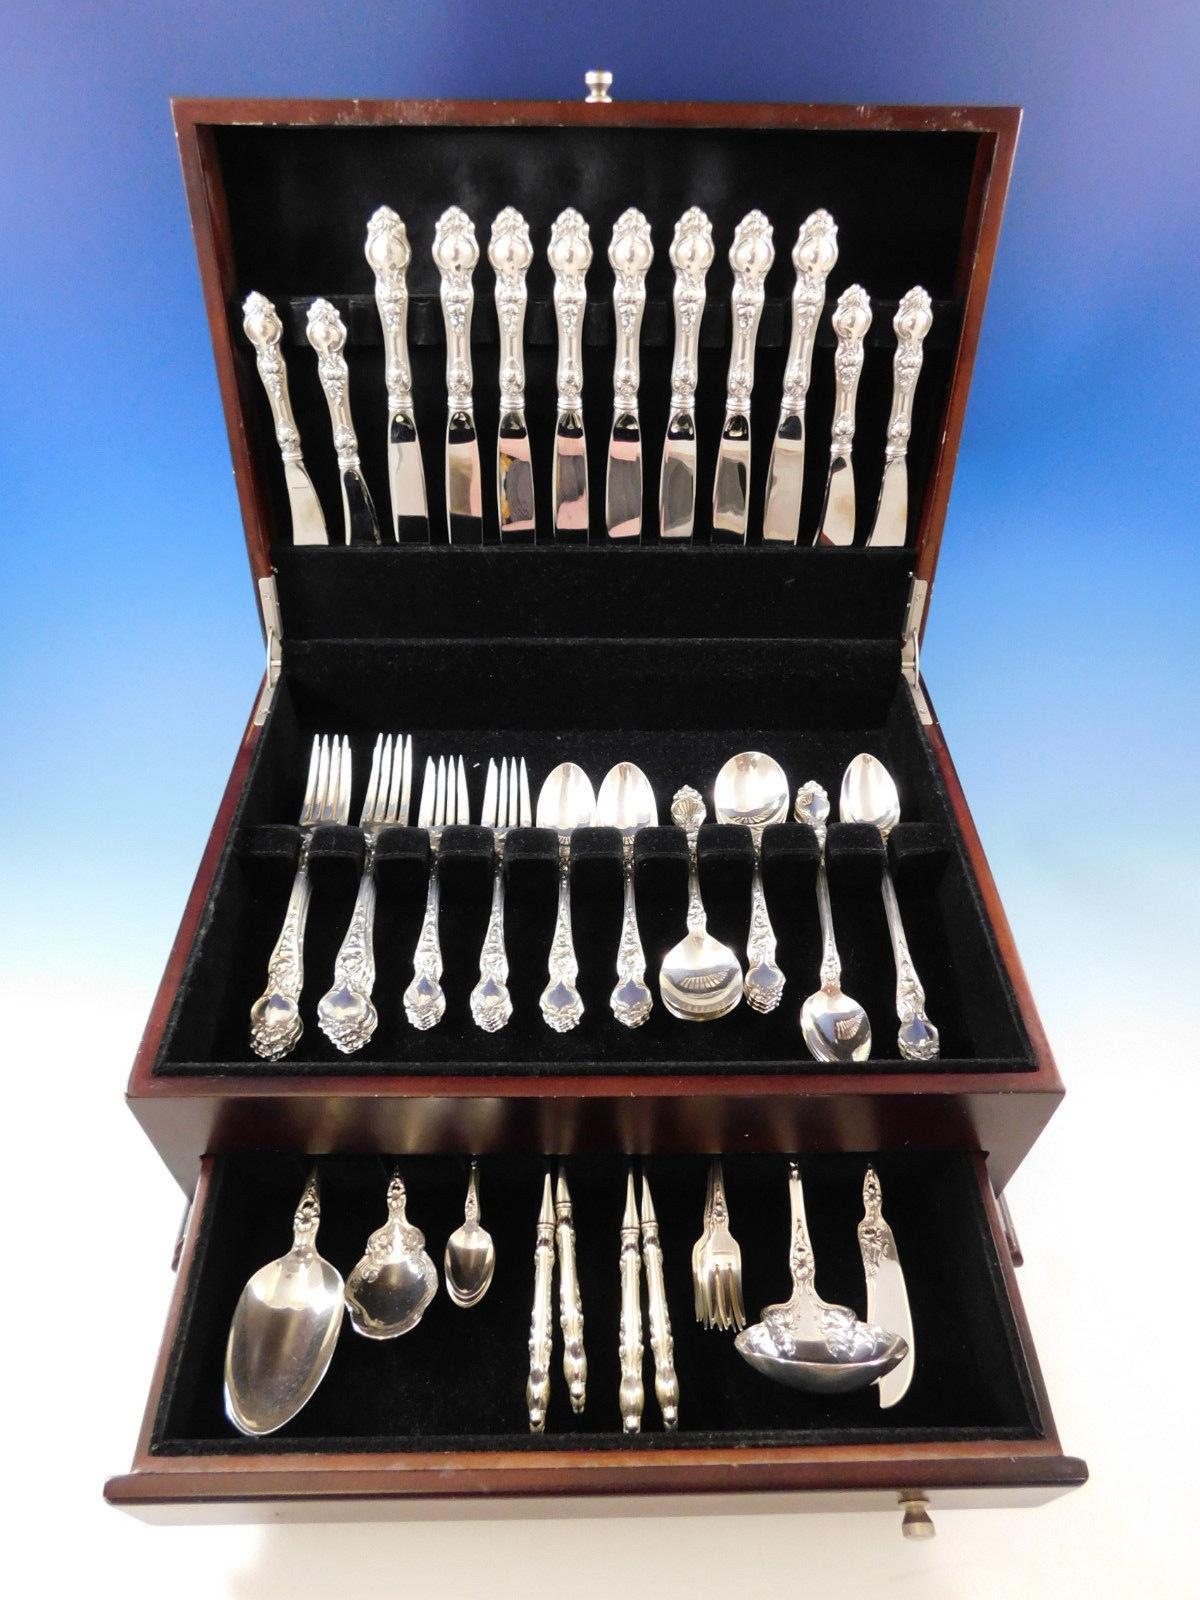 Stunning Violet by Wallace sterling silver flatware set - 77 pieces. This set includes:

8 knives, 8 7/8